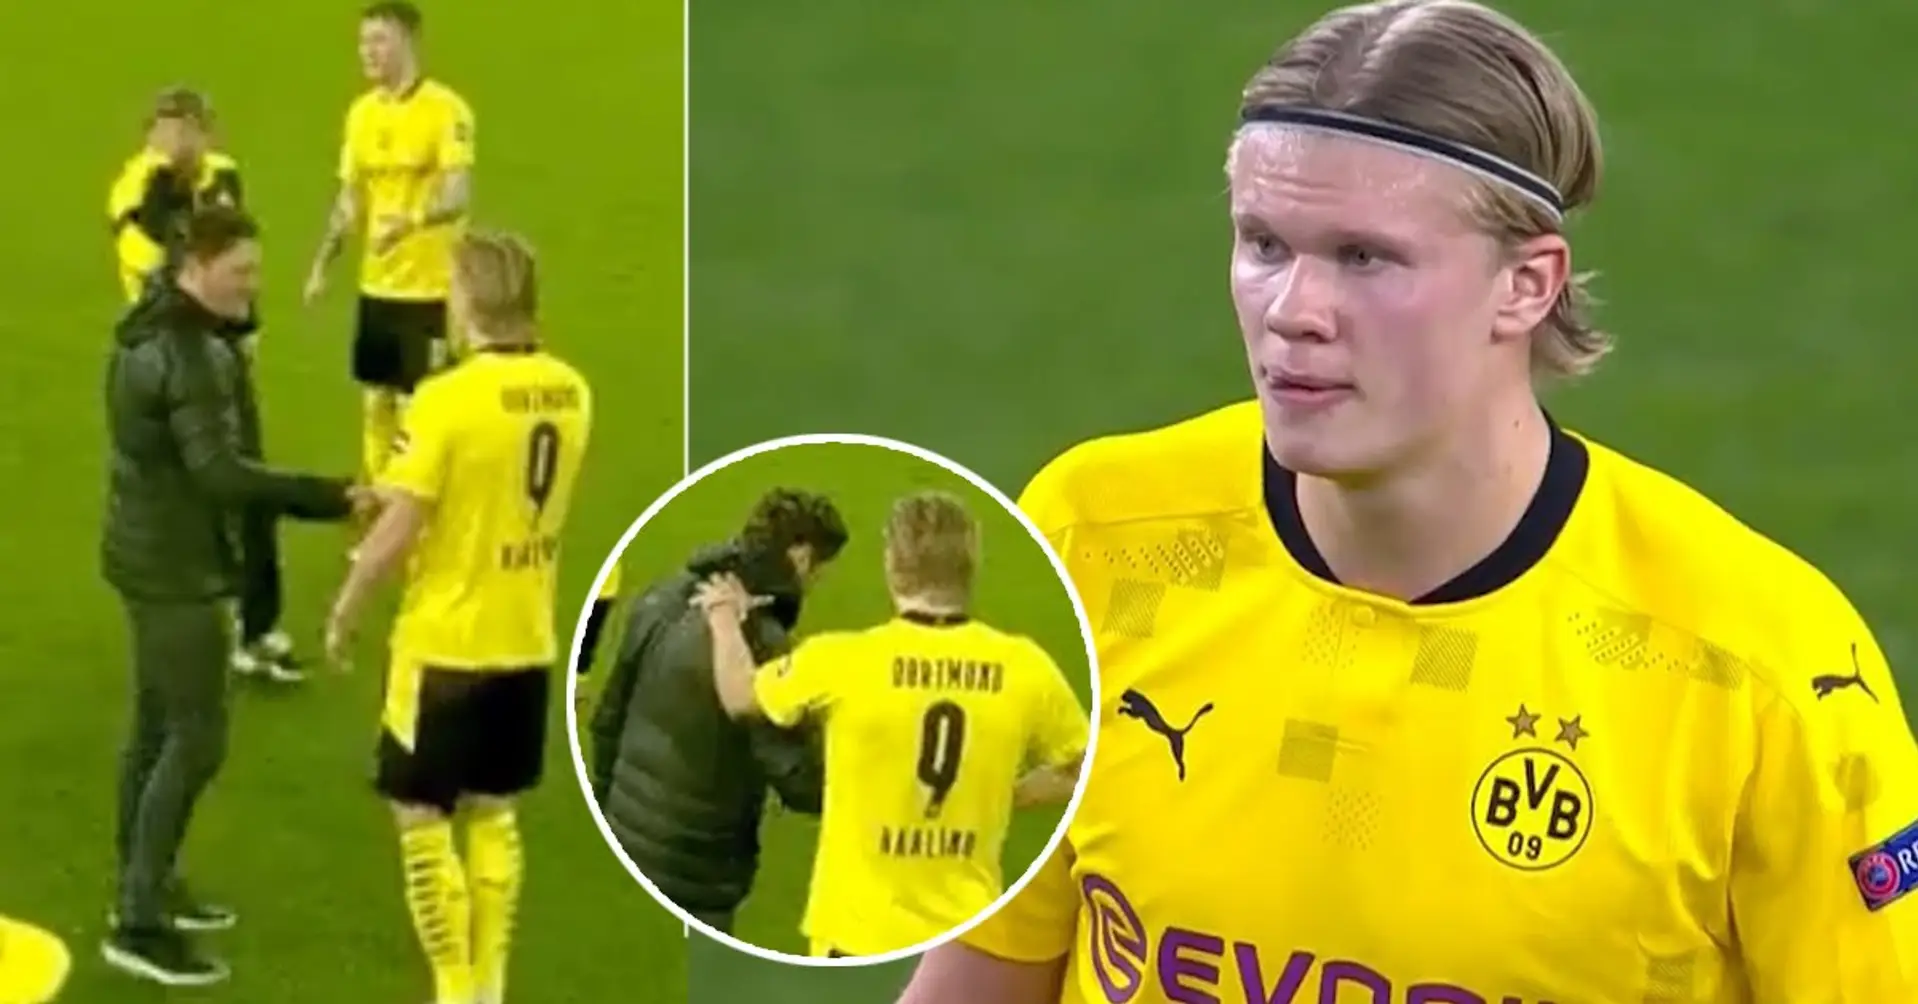 Incredible moment between Erling Haaland and Borussia Dortmund coach caught on camera